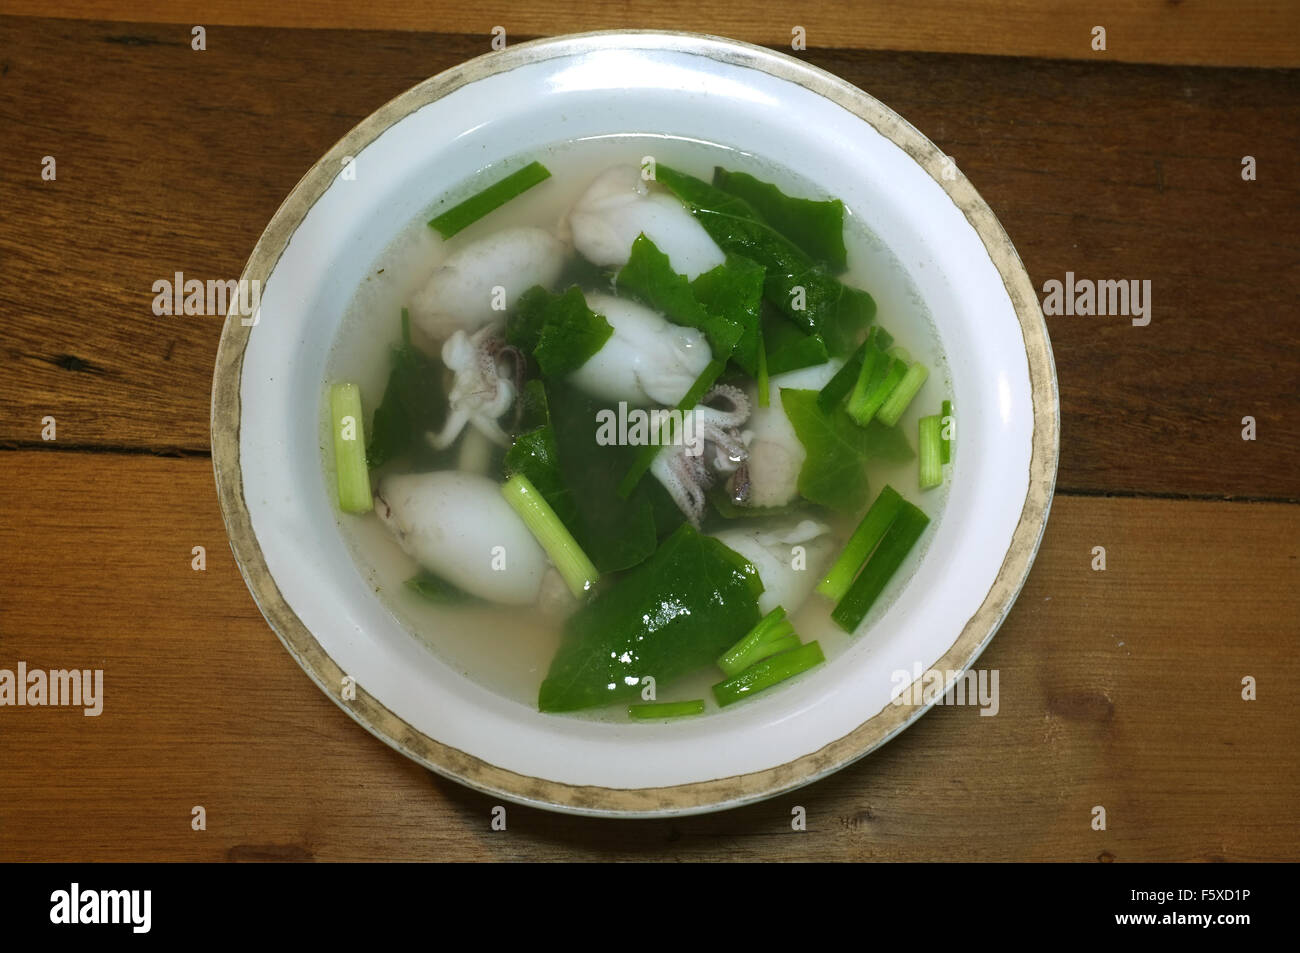 https://c8.alamy.com/comp/F5XD1P/plain-clear-soup-of-squid-stuffed-with-minced-pork-and-vegetable-F5XD1P.jpg